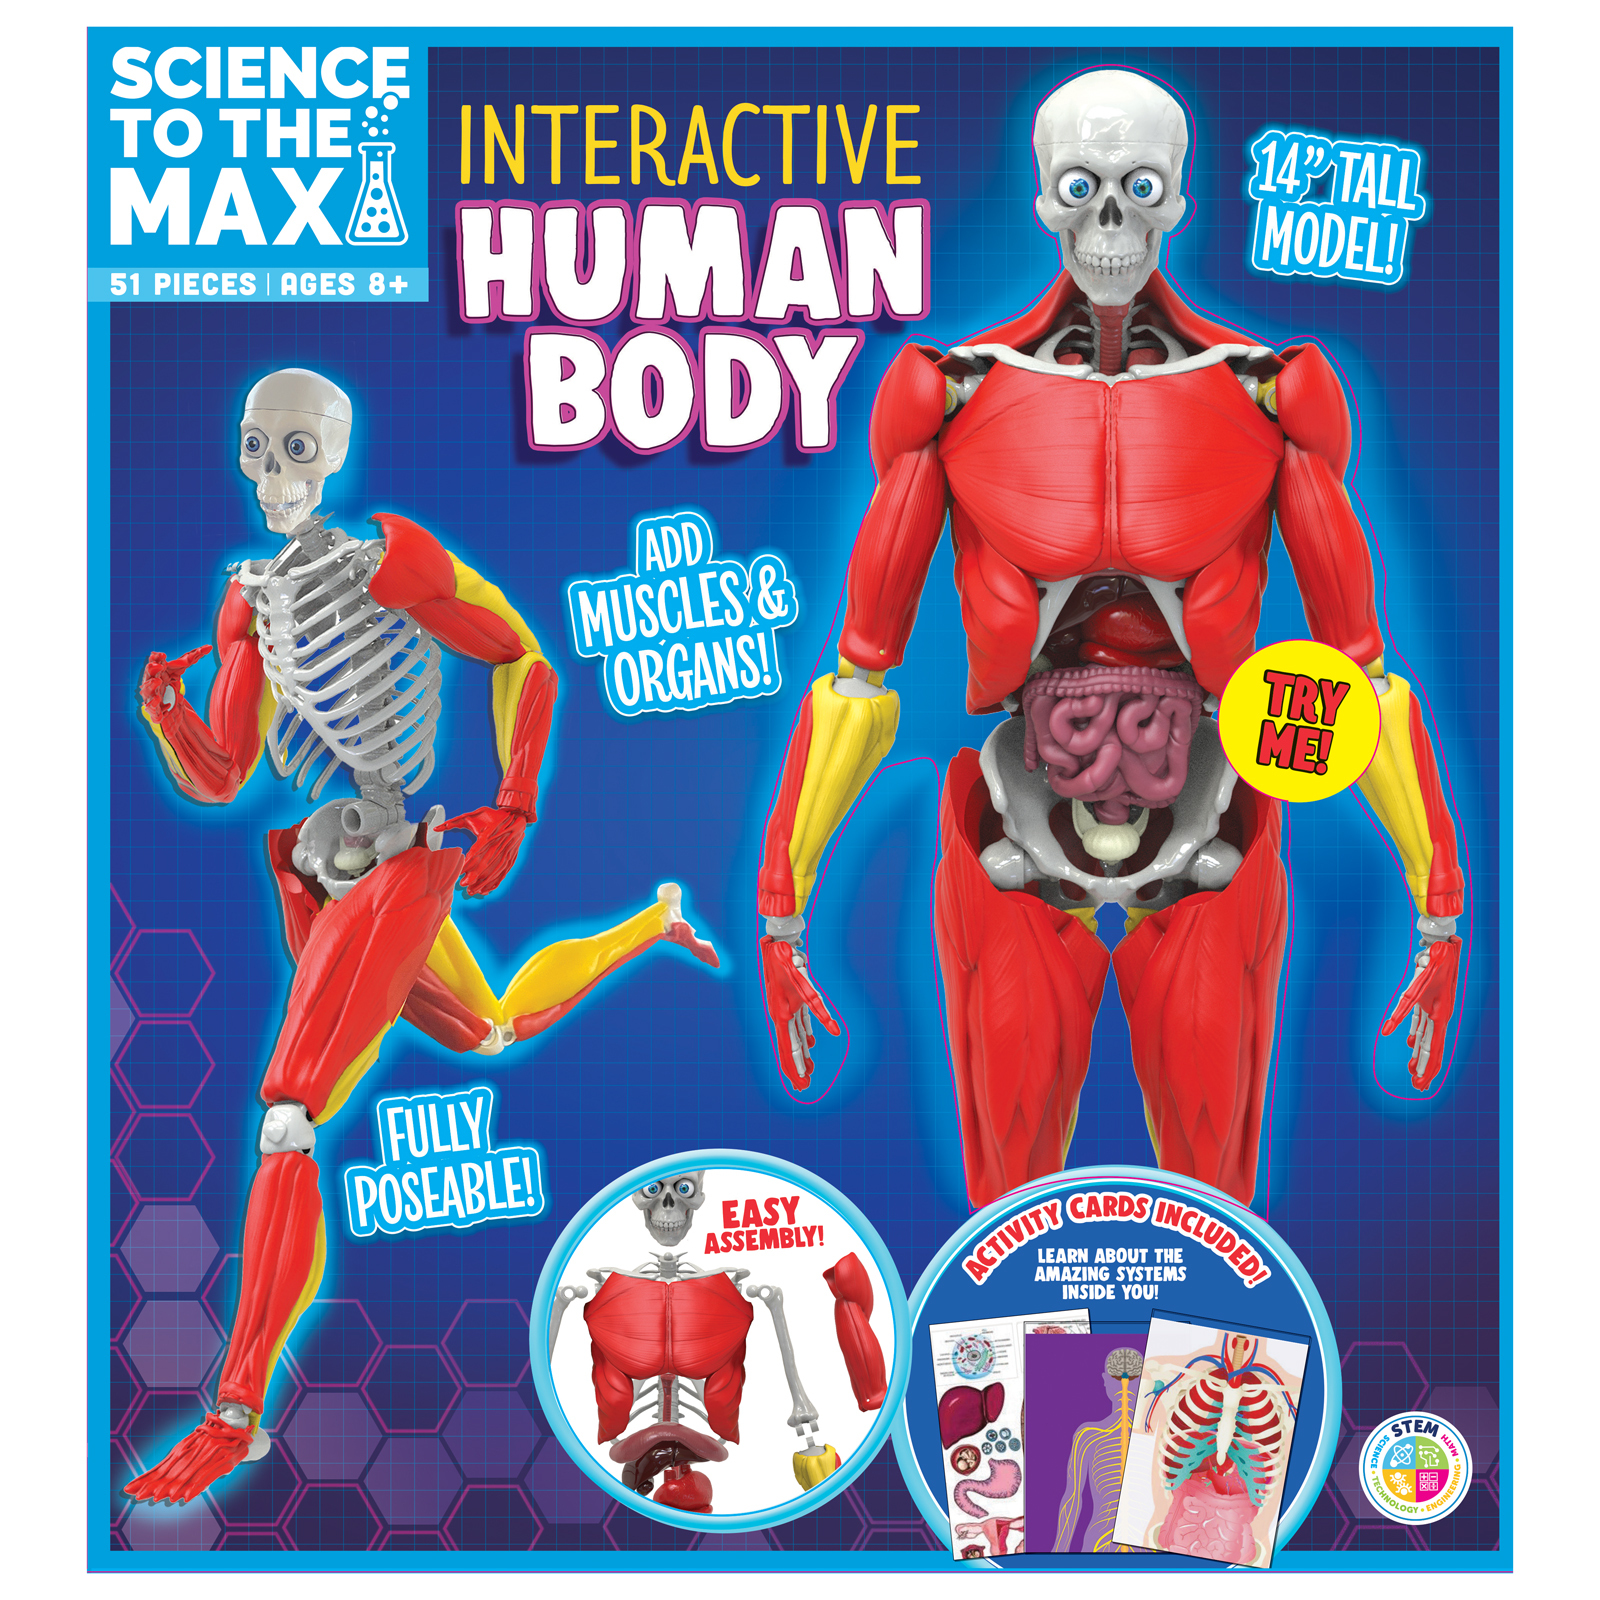 Science to the Max Interactive Human Body